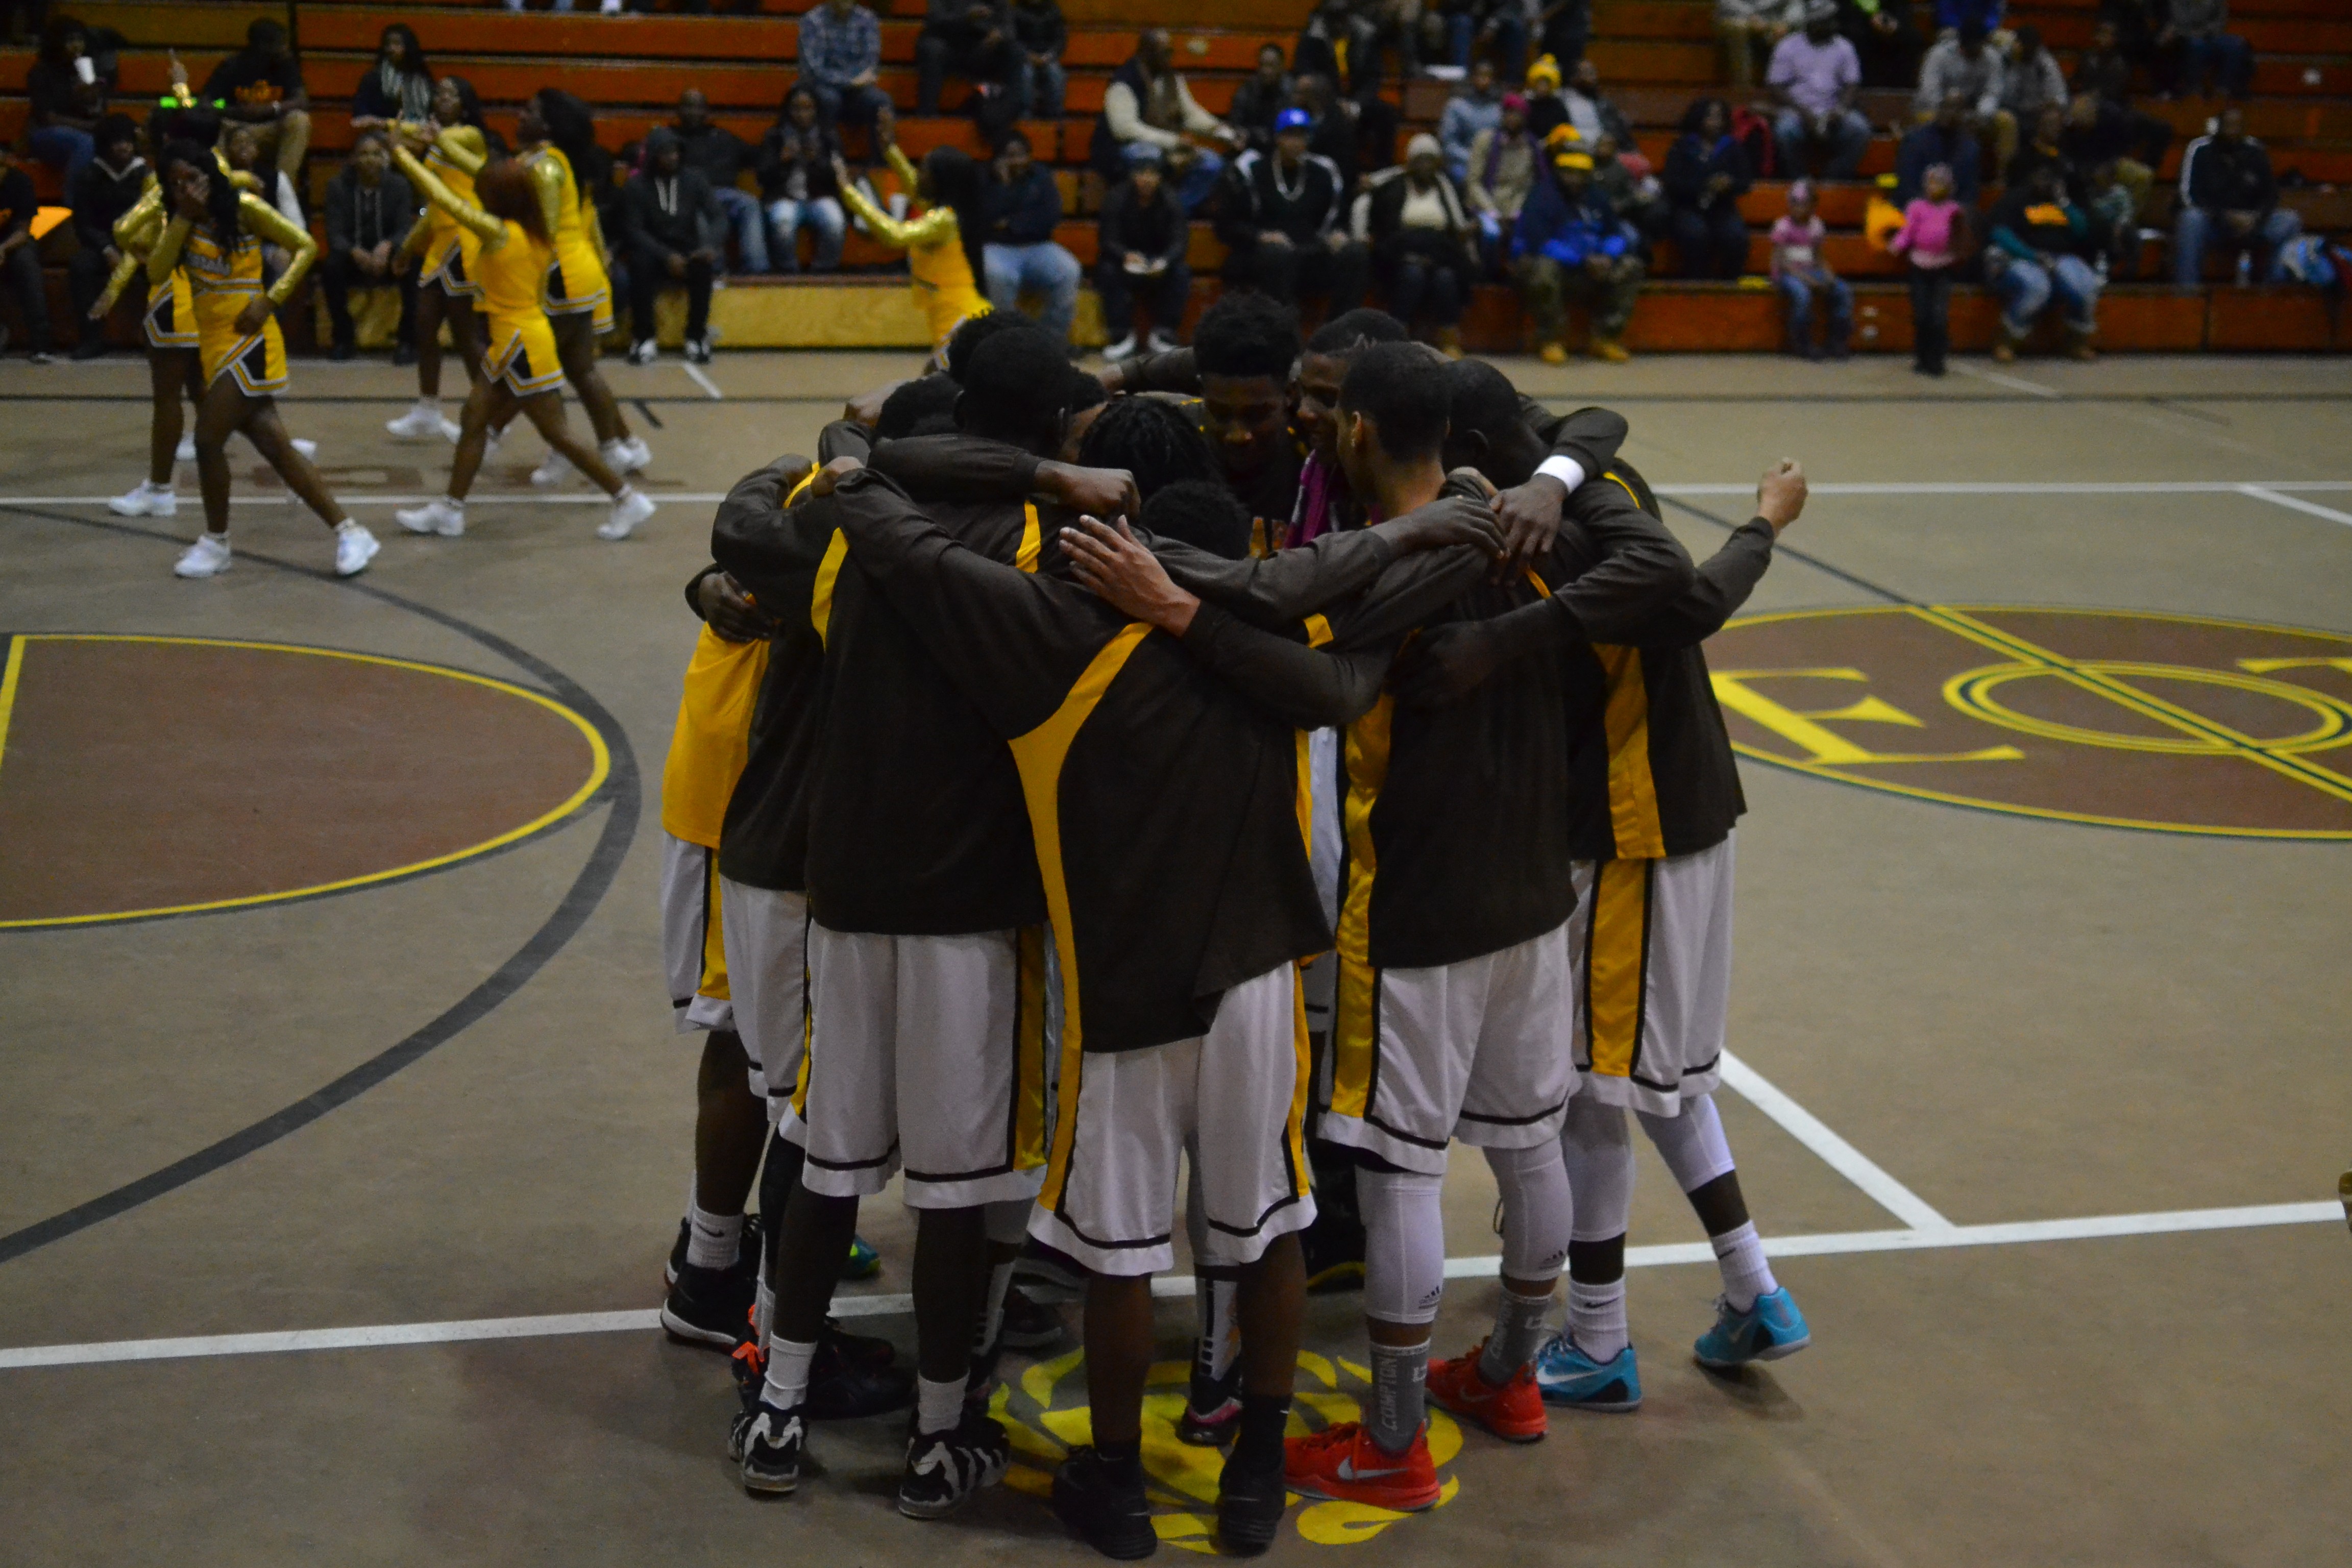 The Program: Meet the East Tech Scarabs, a Cleveland Team Actually Worth Rooting For